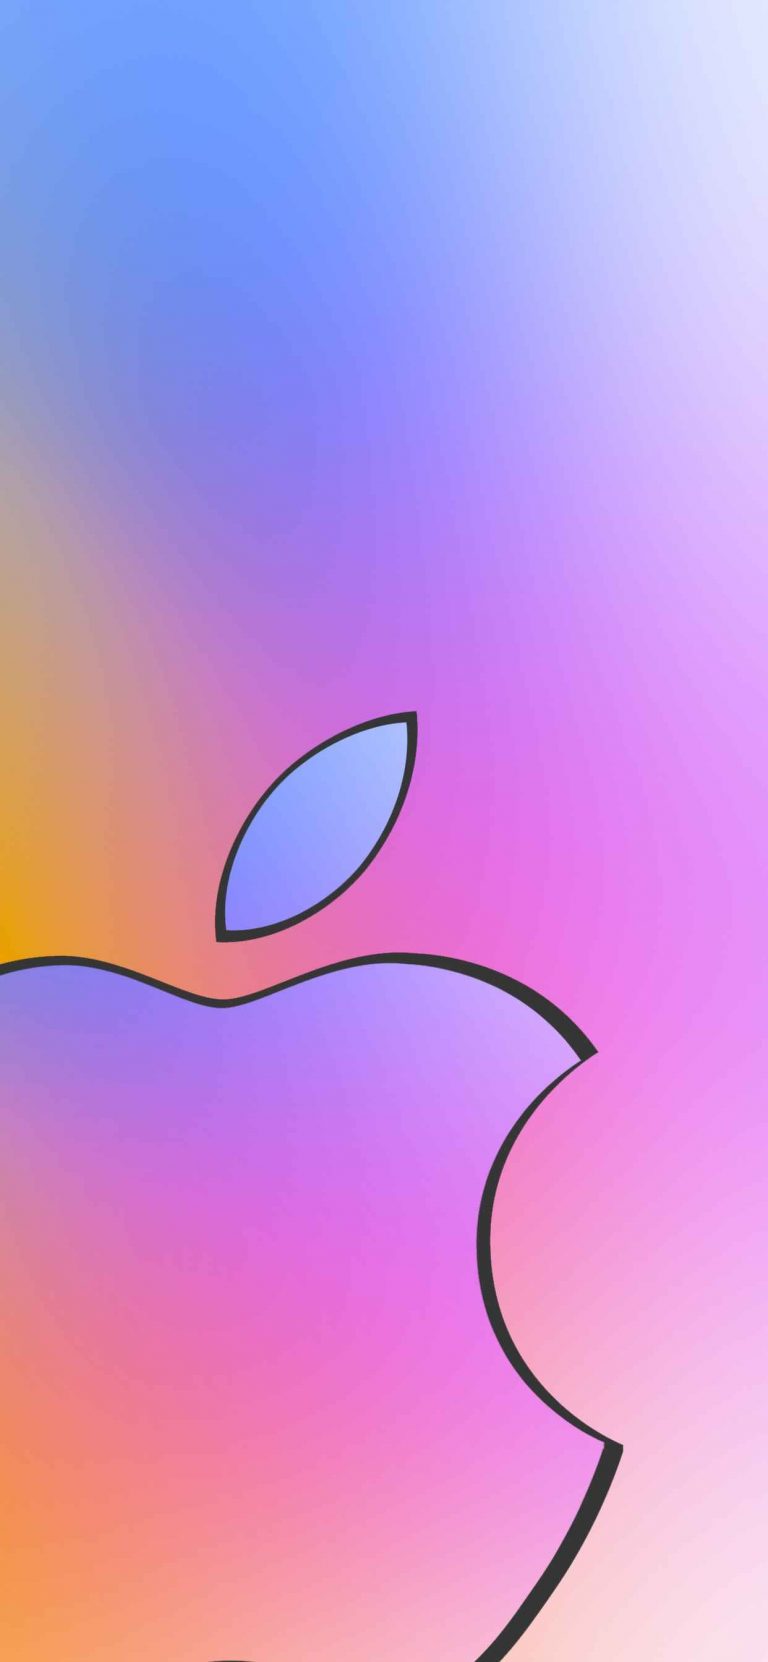 Apple Card Wallpapers [9 Wallpapers] – Download - DroidViews